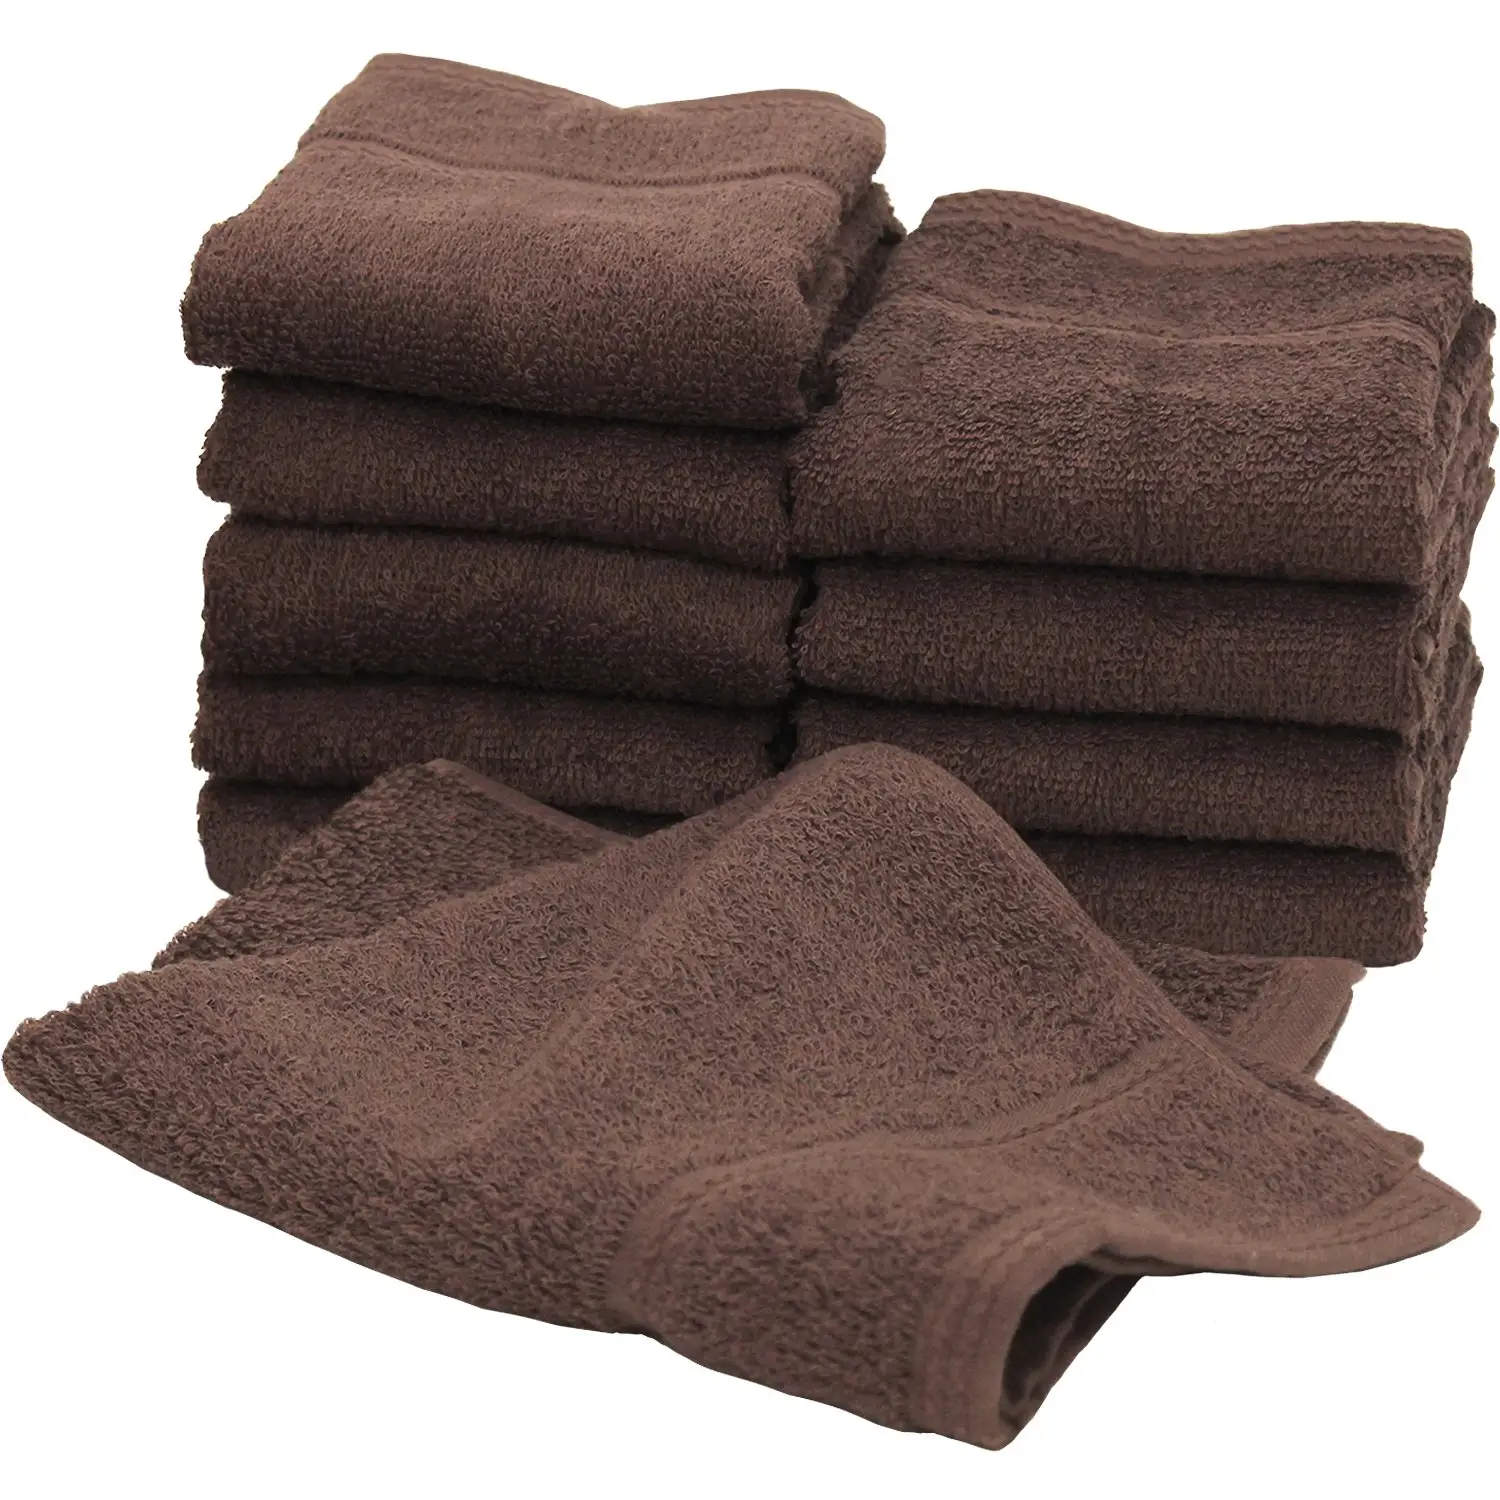 [Wholesale Products] HIORIE Osaka Senshu Brand Daily Towel 100% Cotton Face Towel 34*43cm 350GSM Light Quick Dry Low Dark Brown